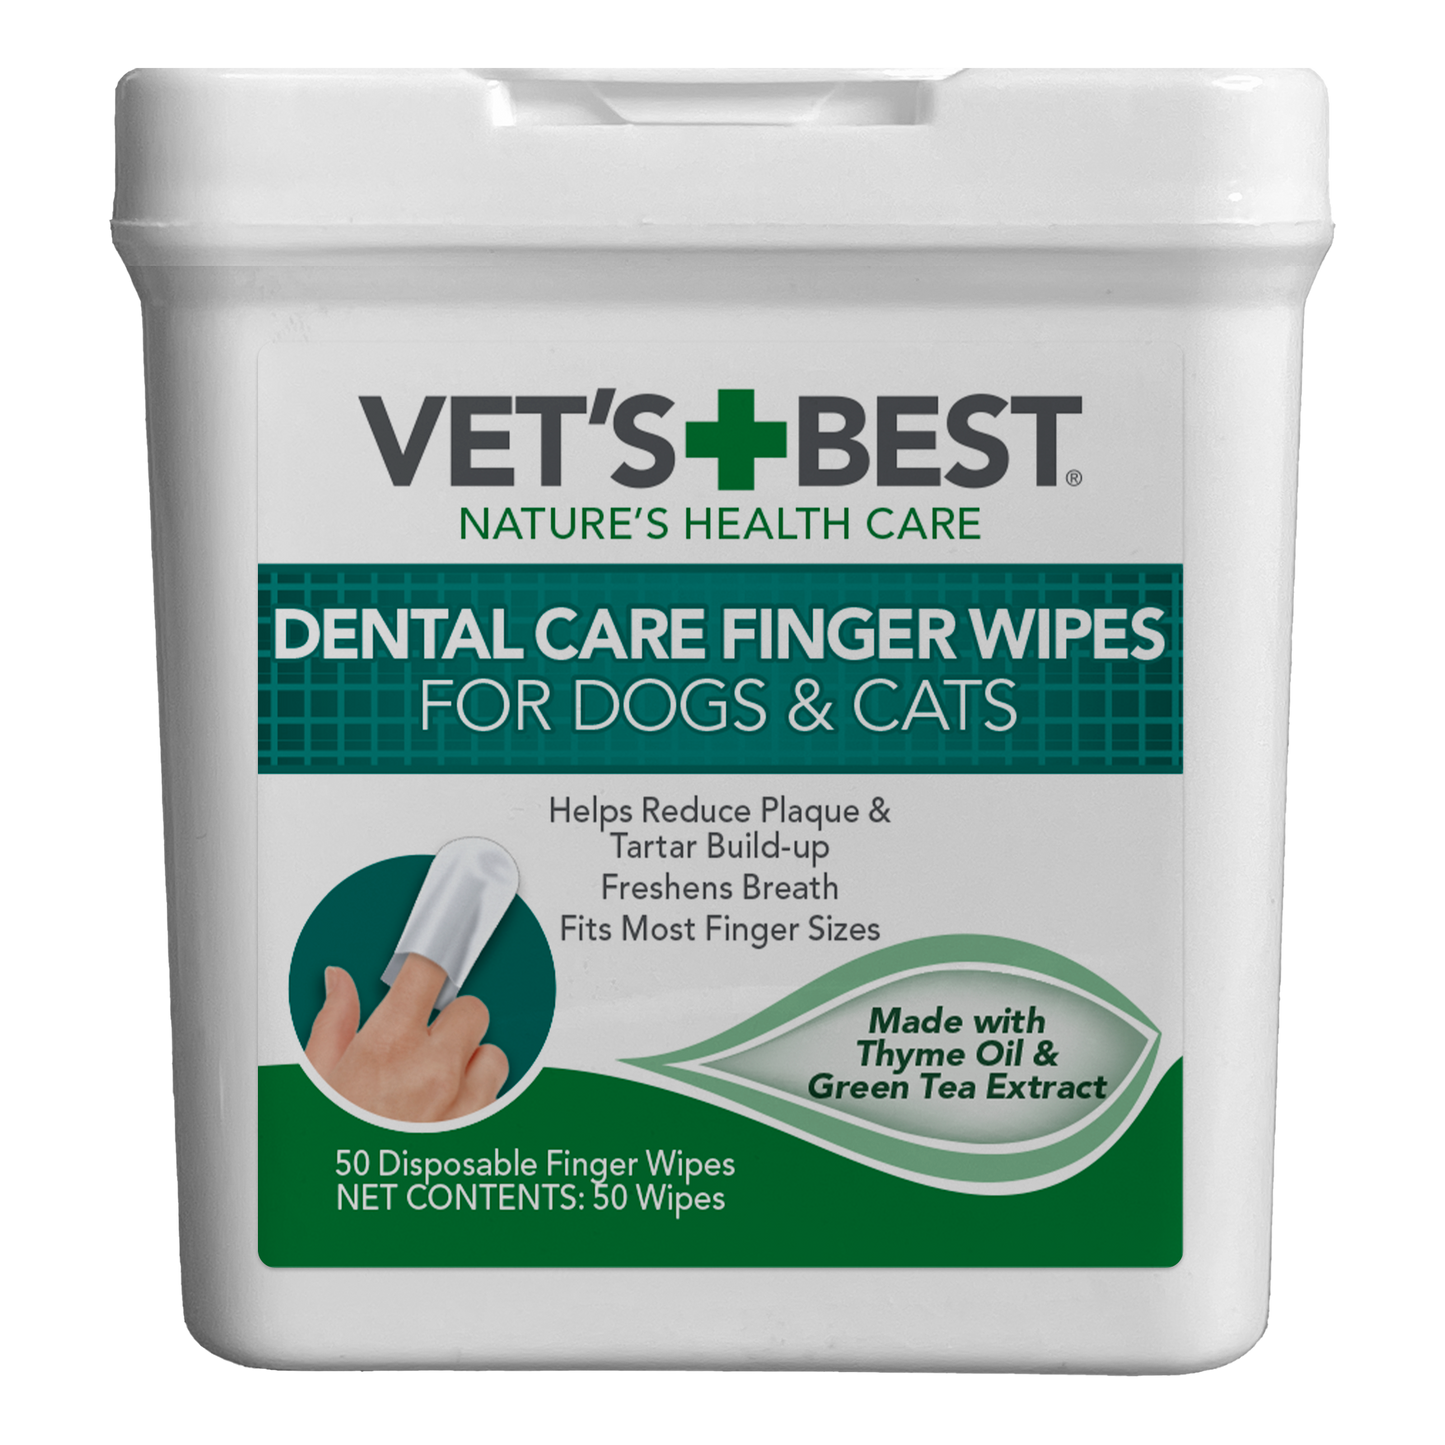 Vet's Best Dental Care Finger Wipes for Dogs and Cats 1ea/50 ct